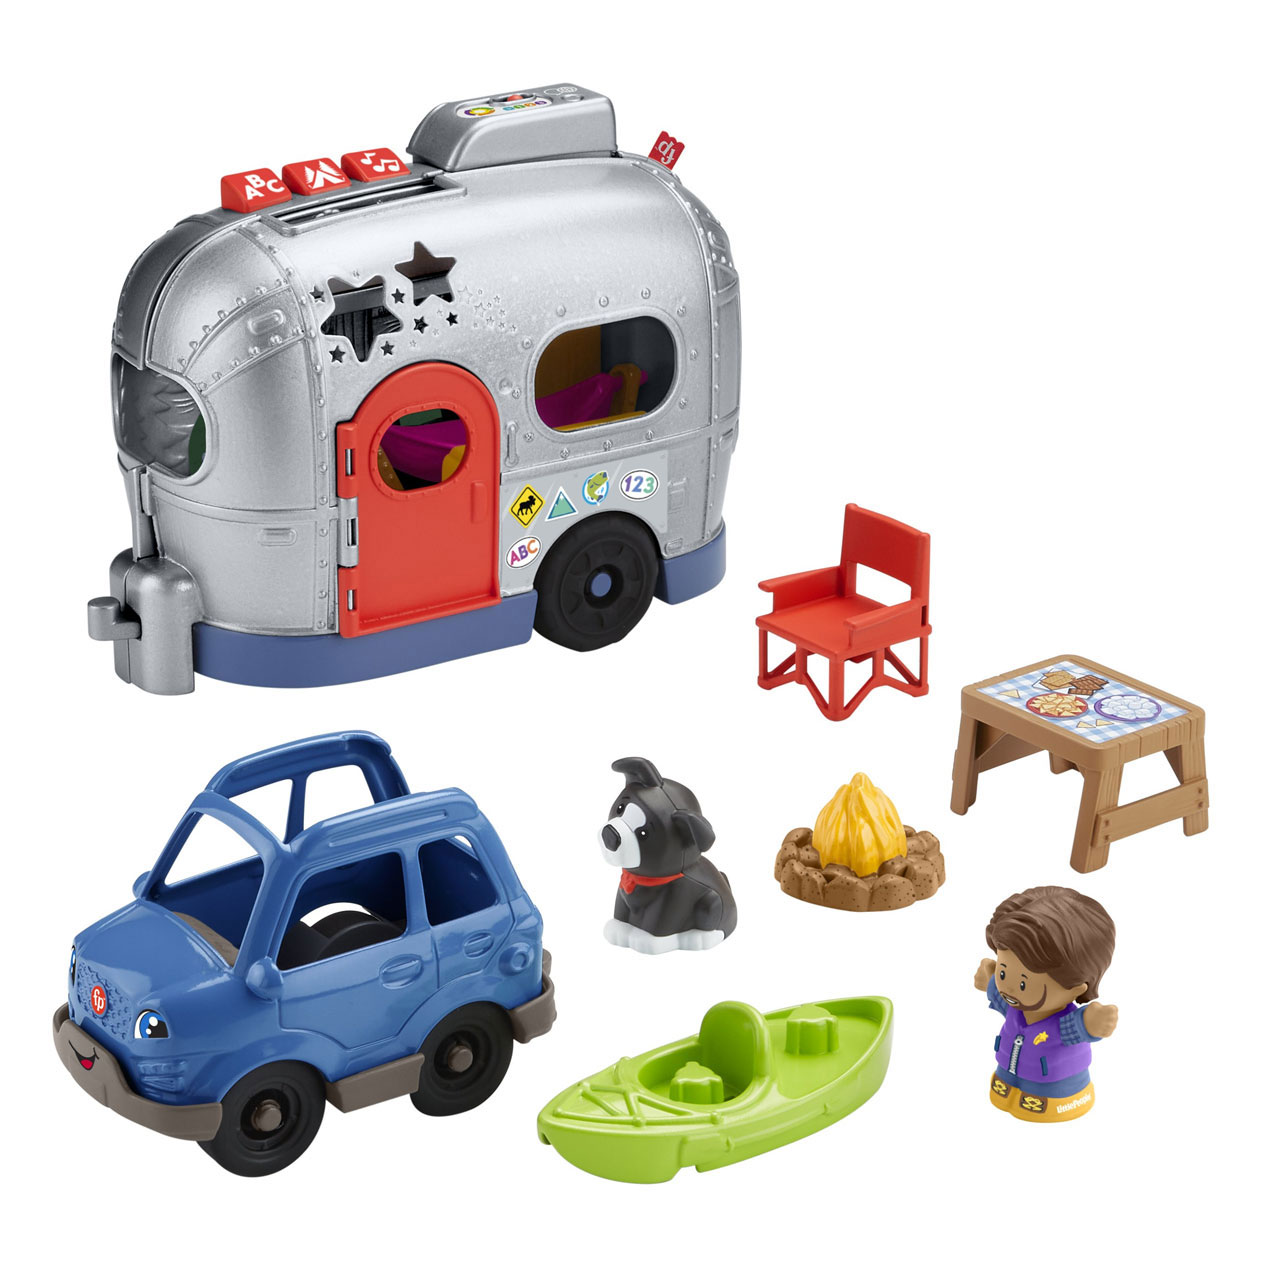 Fisher-Price Little People Camper